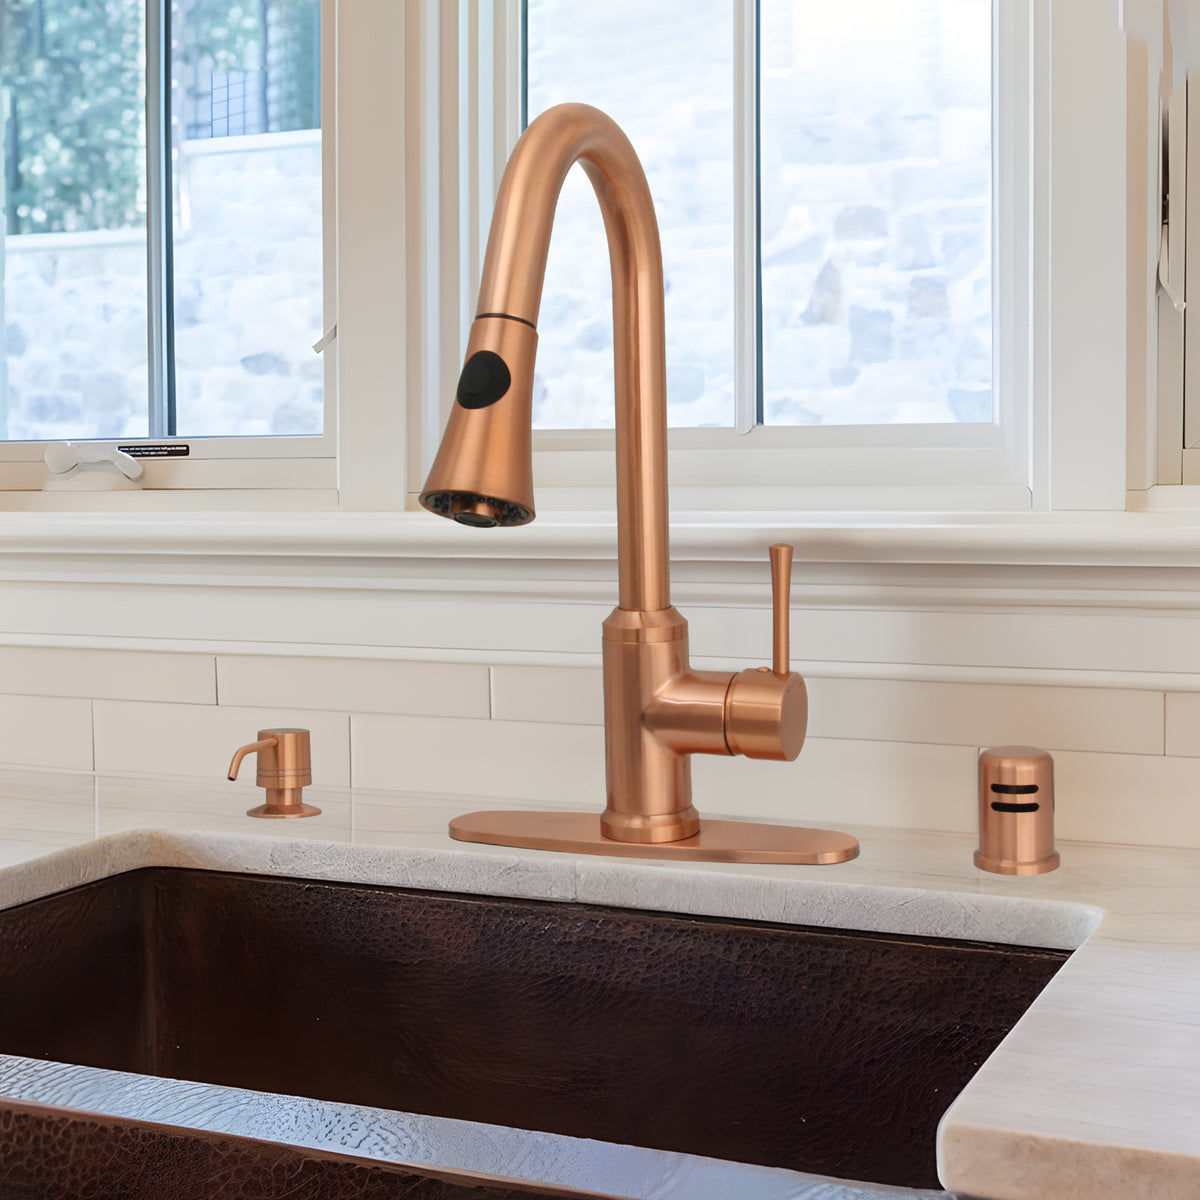 Copper Pull Out Kitchen Faucet with Deck Plate, Single Level Solid Brass Kitchen Sink Faucets with Pull Down Sprayer-AK96466C